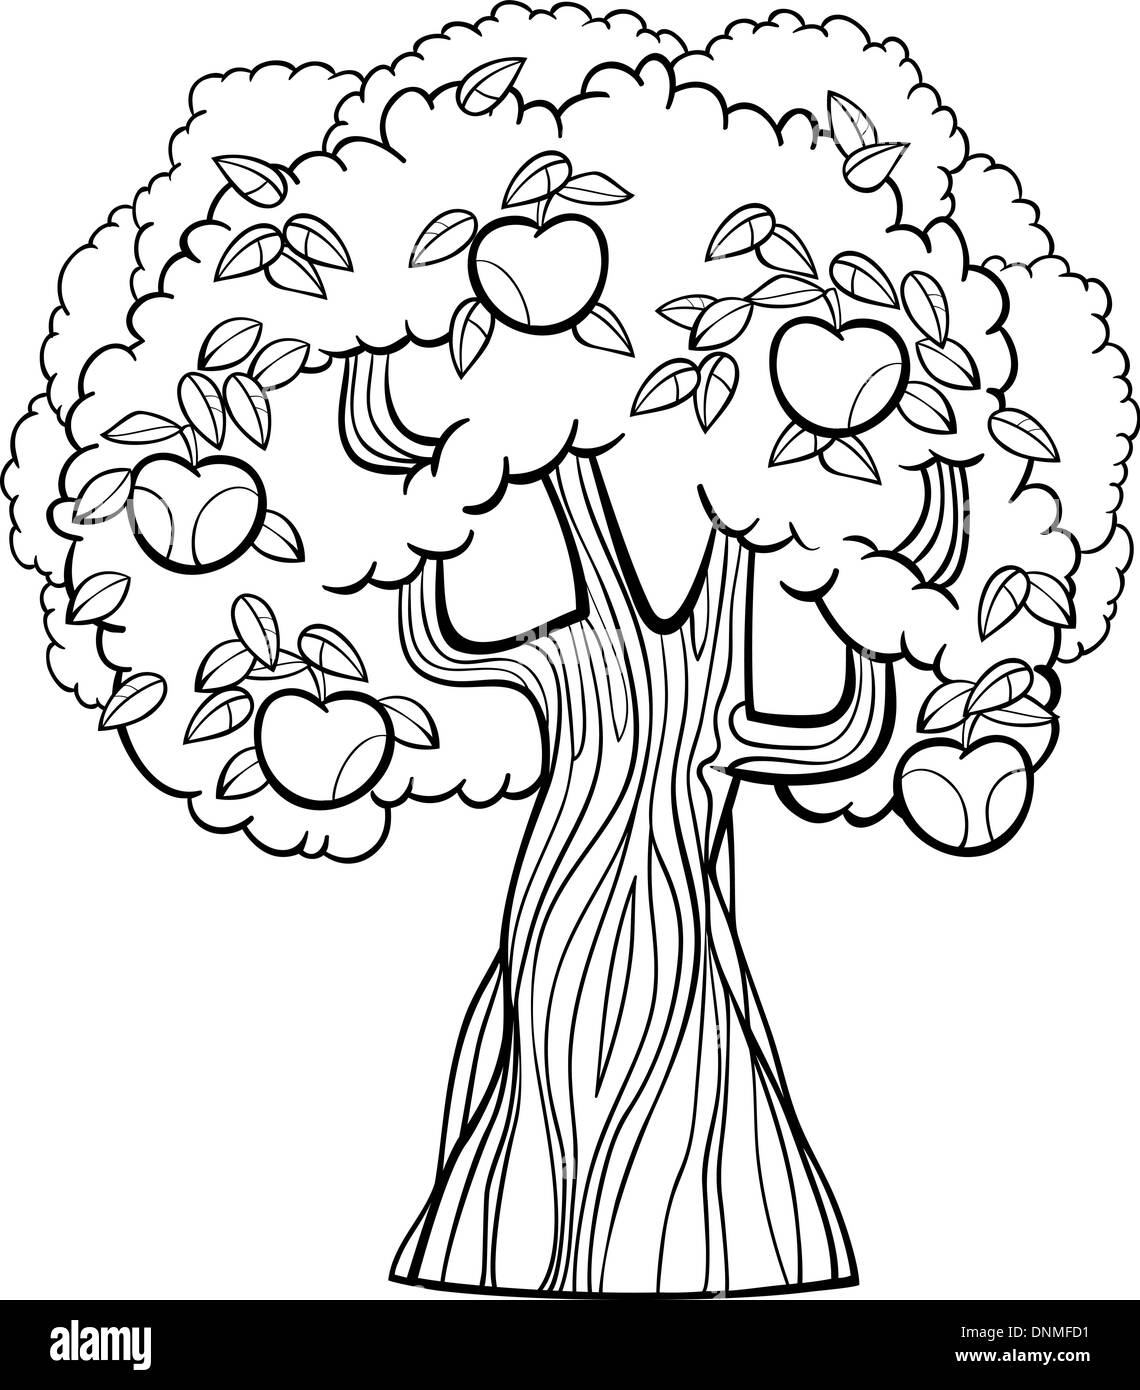 Black and White Cartoon Illustration of Apple Tree with Apples for Coloring Book Stock Vector